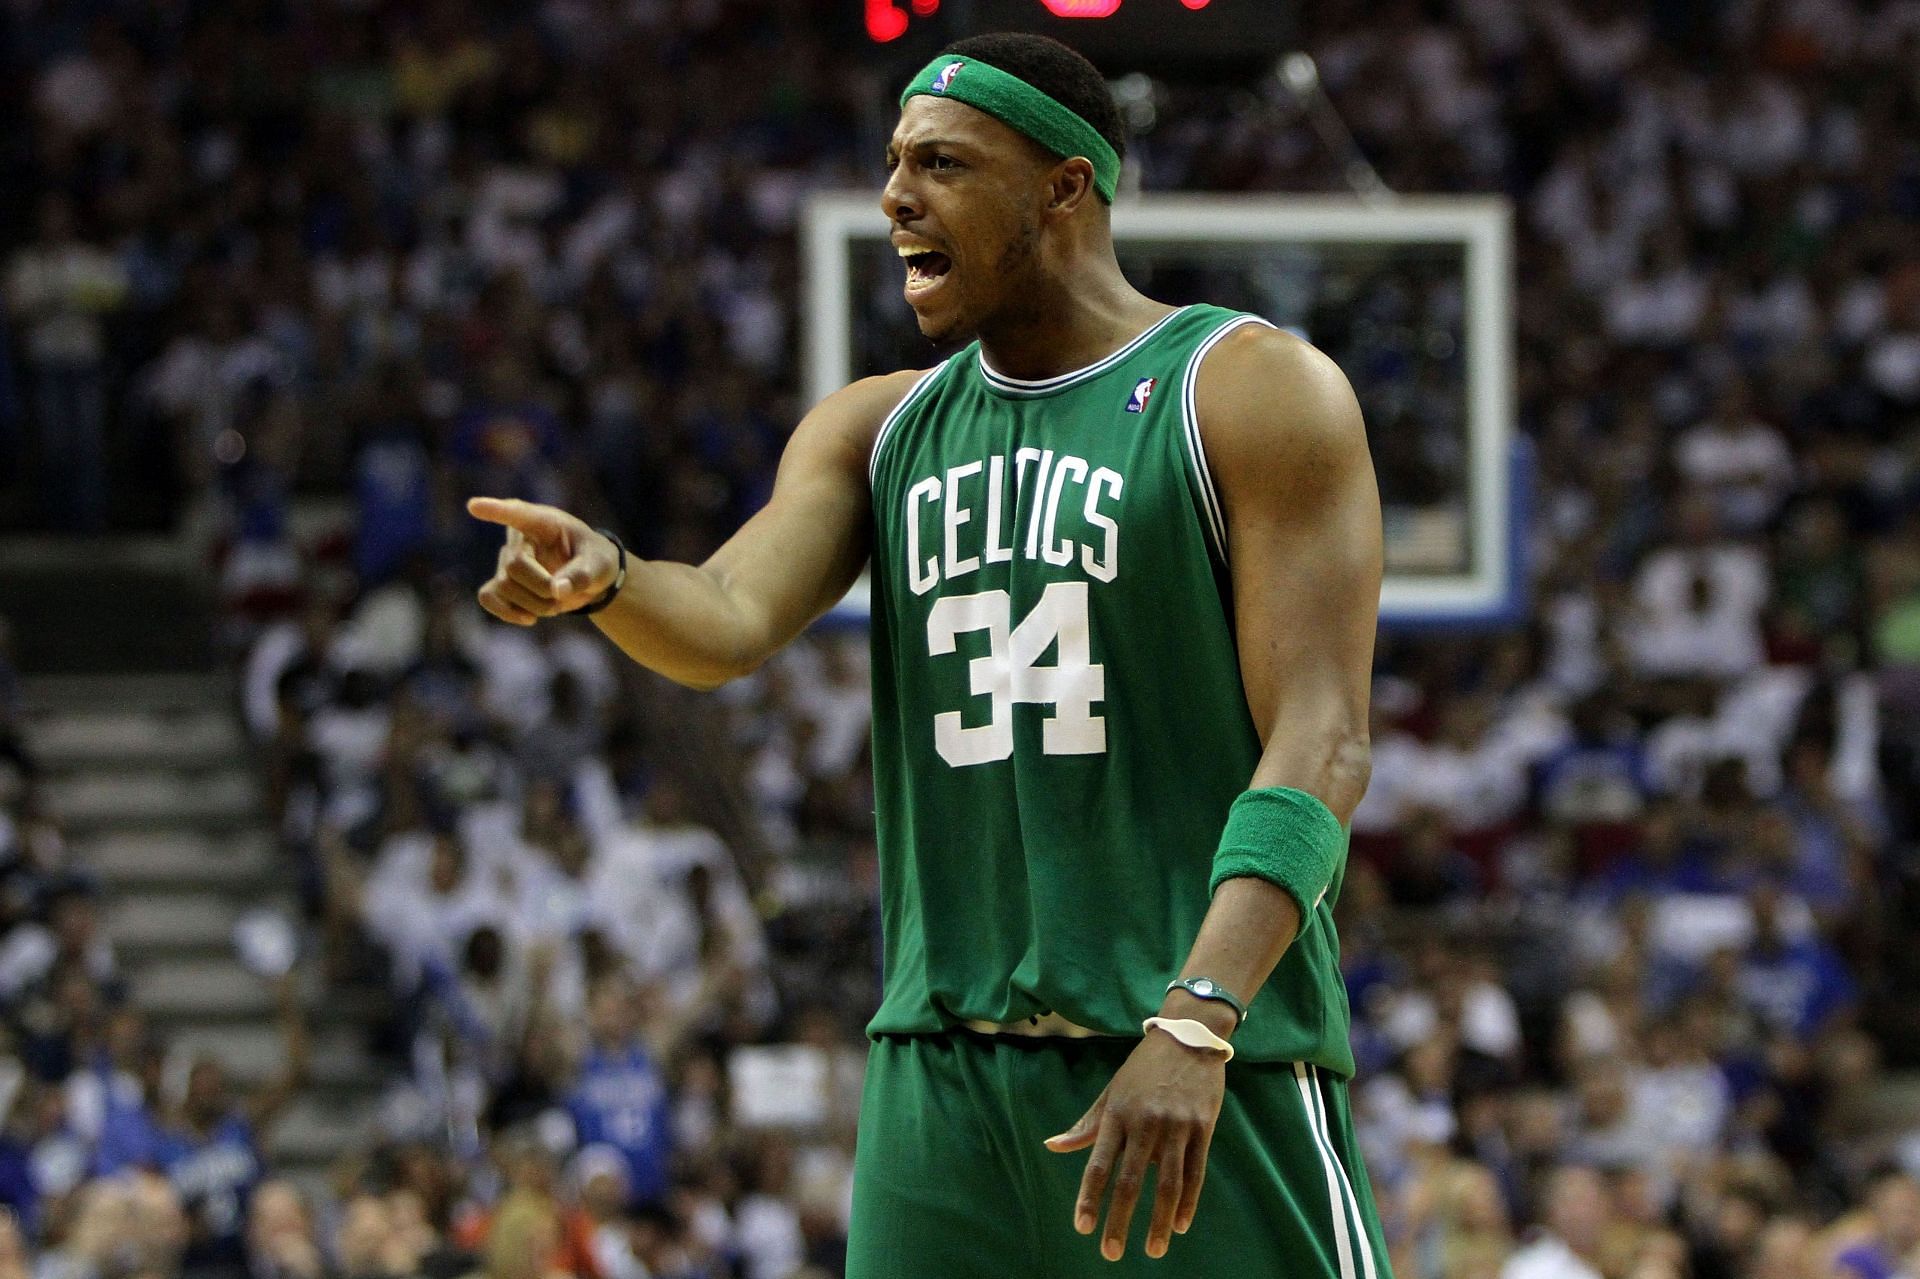 Paul Pierce is one of the greatest players in Boston Celtics history (Image via Getty Images)